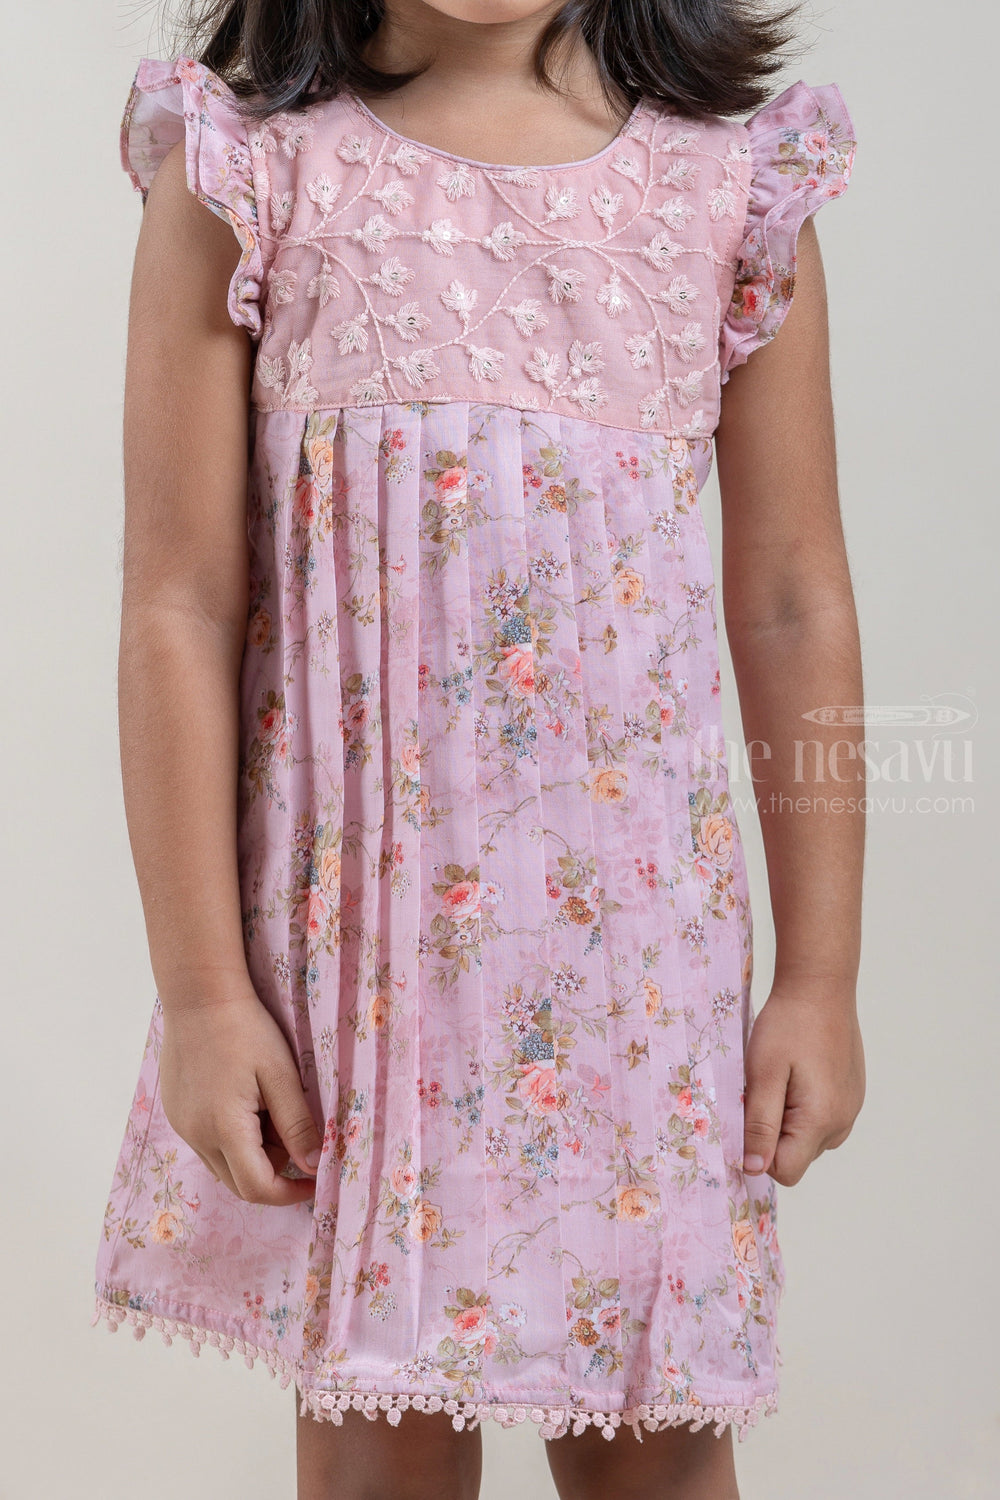 The Nesavu Baby Cotton Frocks Gorgeous Salmon Pink Floral Printed Pleated Cotton Frock For Baby Girls Nesavu Latest Frock Design For Girls | Baby Frock Suit | The Nesavu